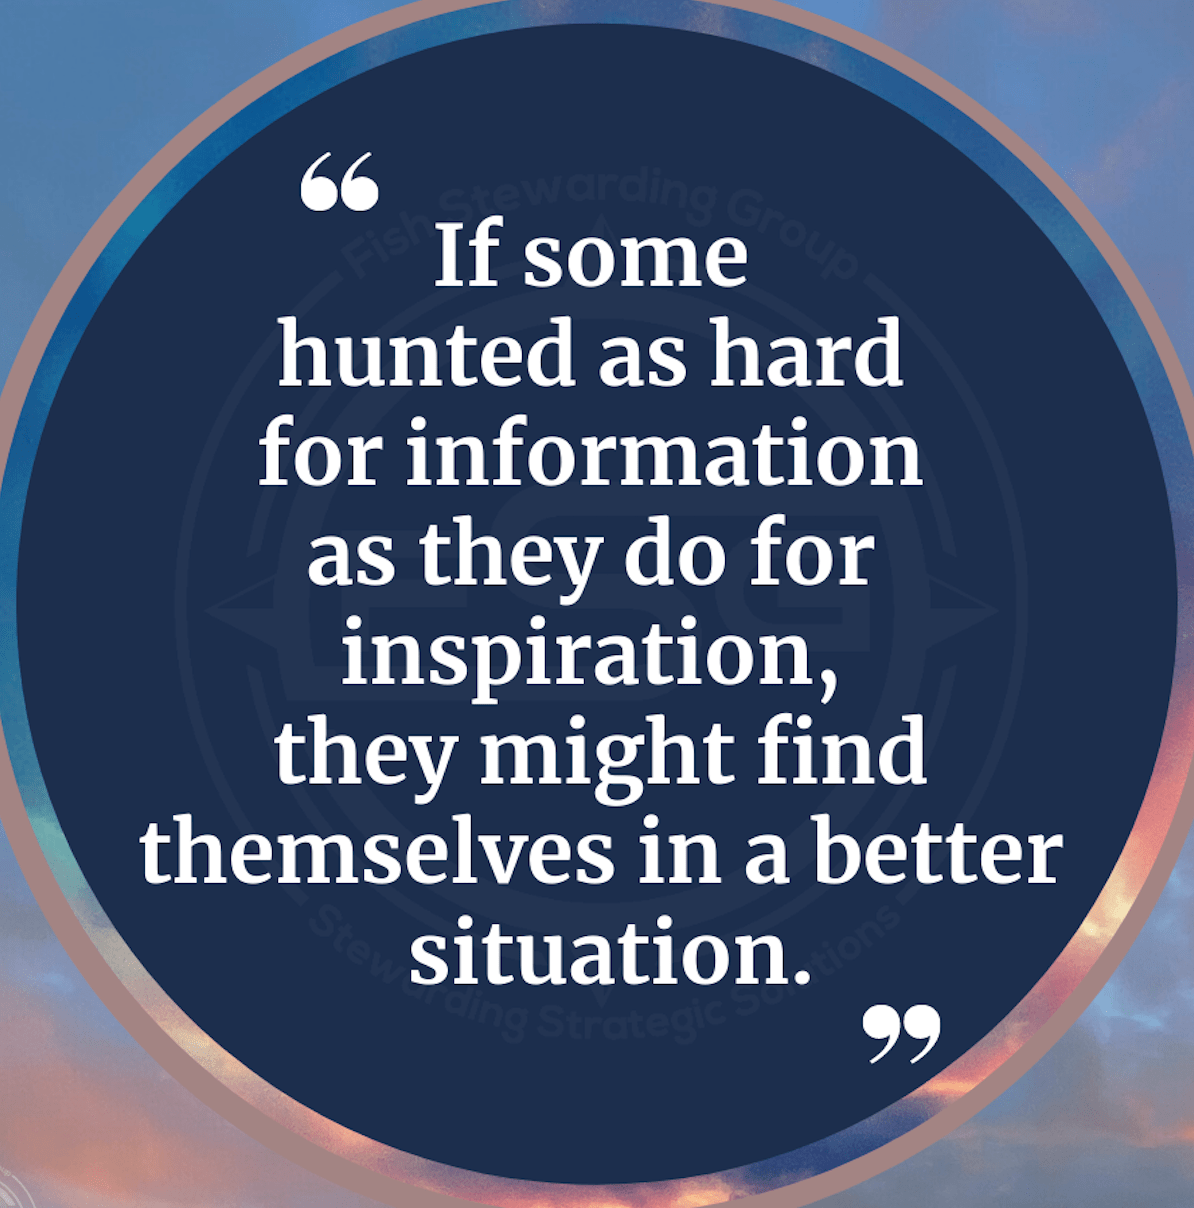 if some hunted as hard for information as the do for inspiration, they might find themselves in a better situation